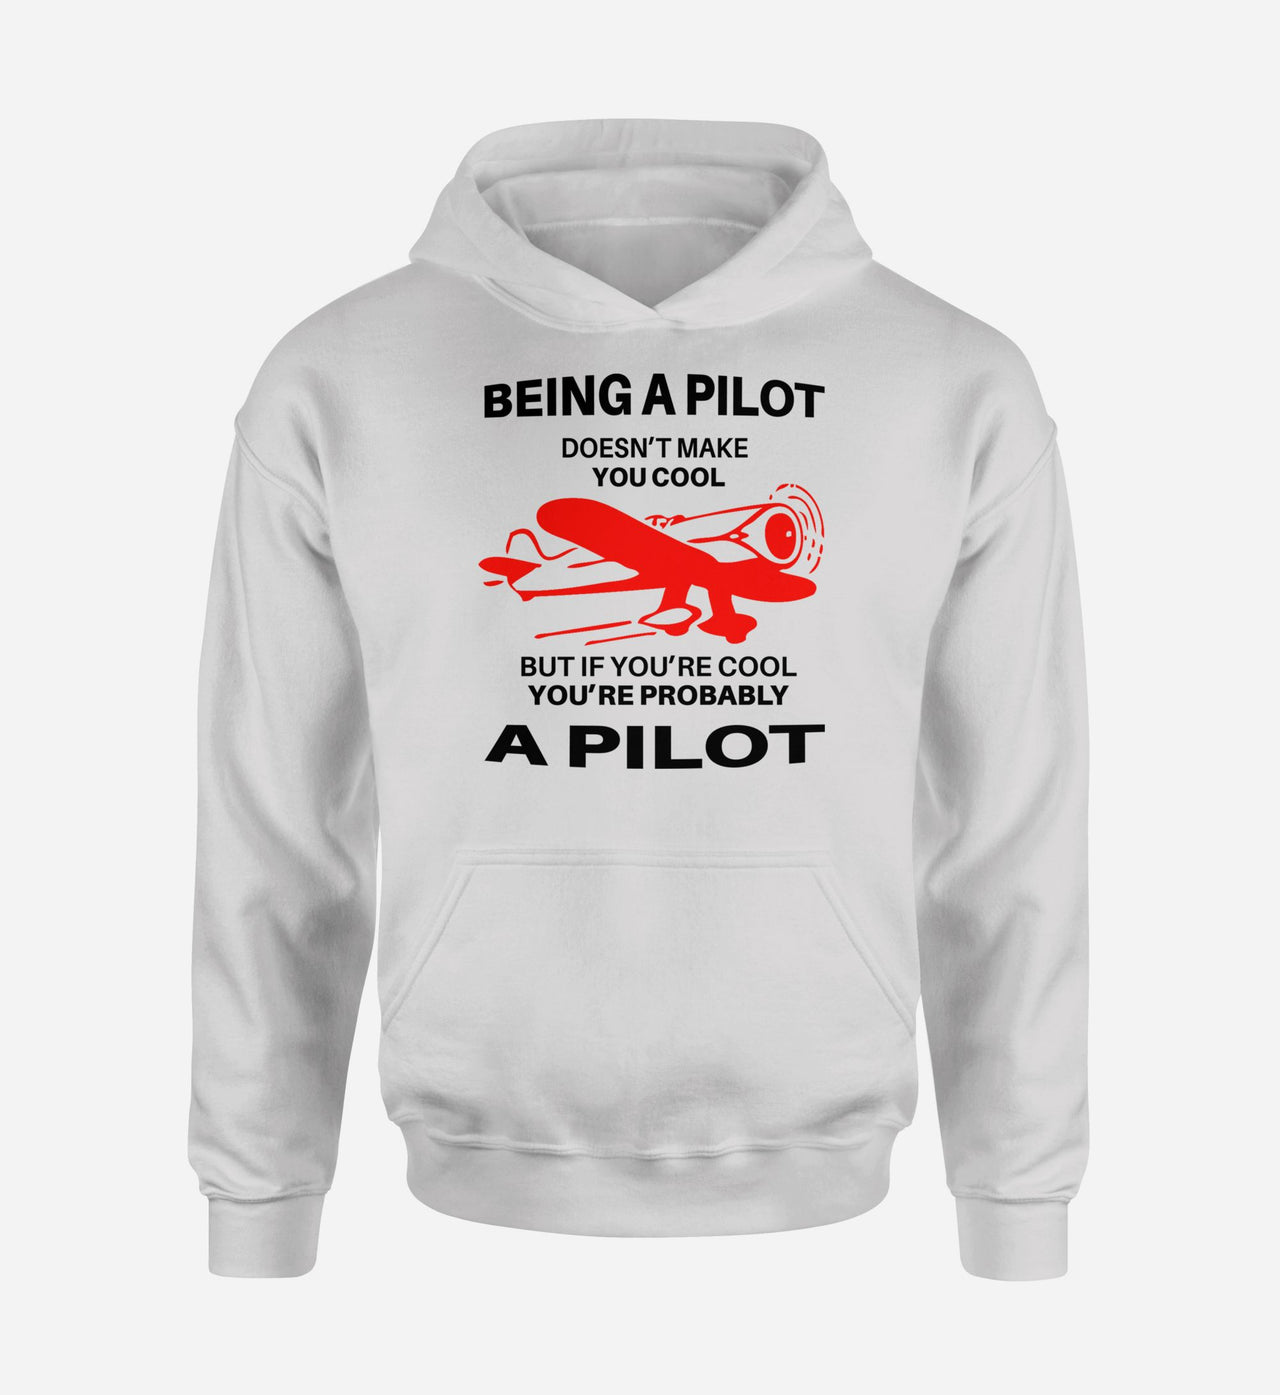 If You're Cool You're Probably a Pilot Designed Hoodies